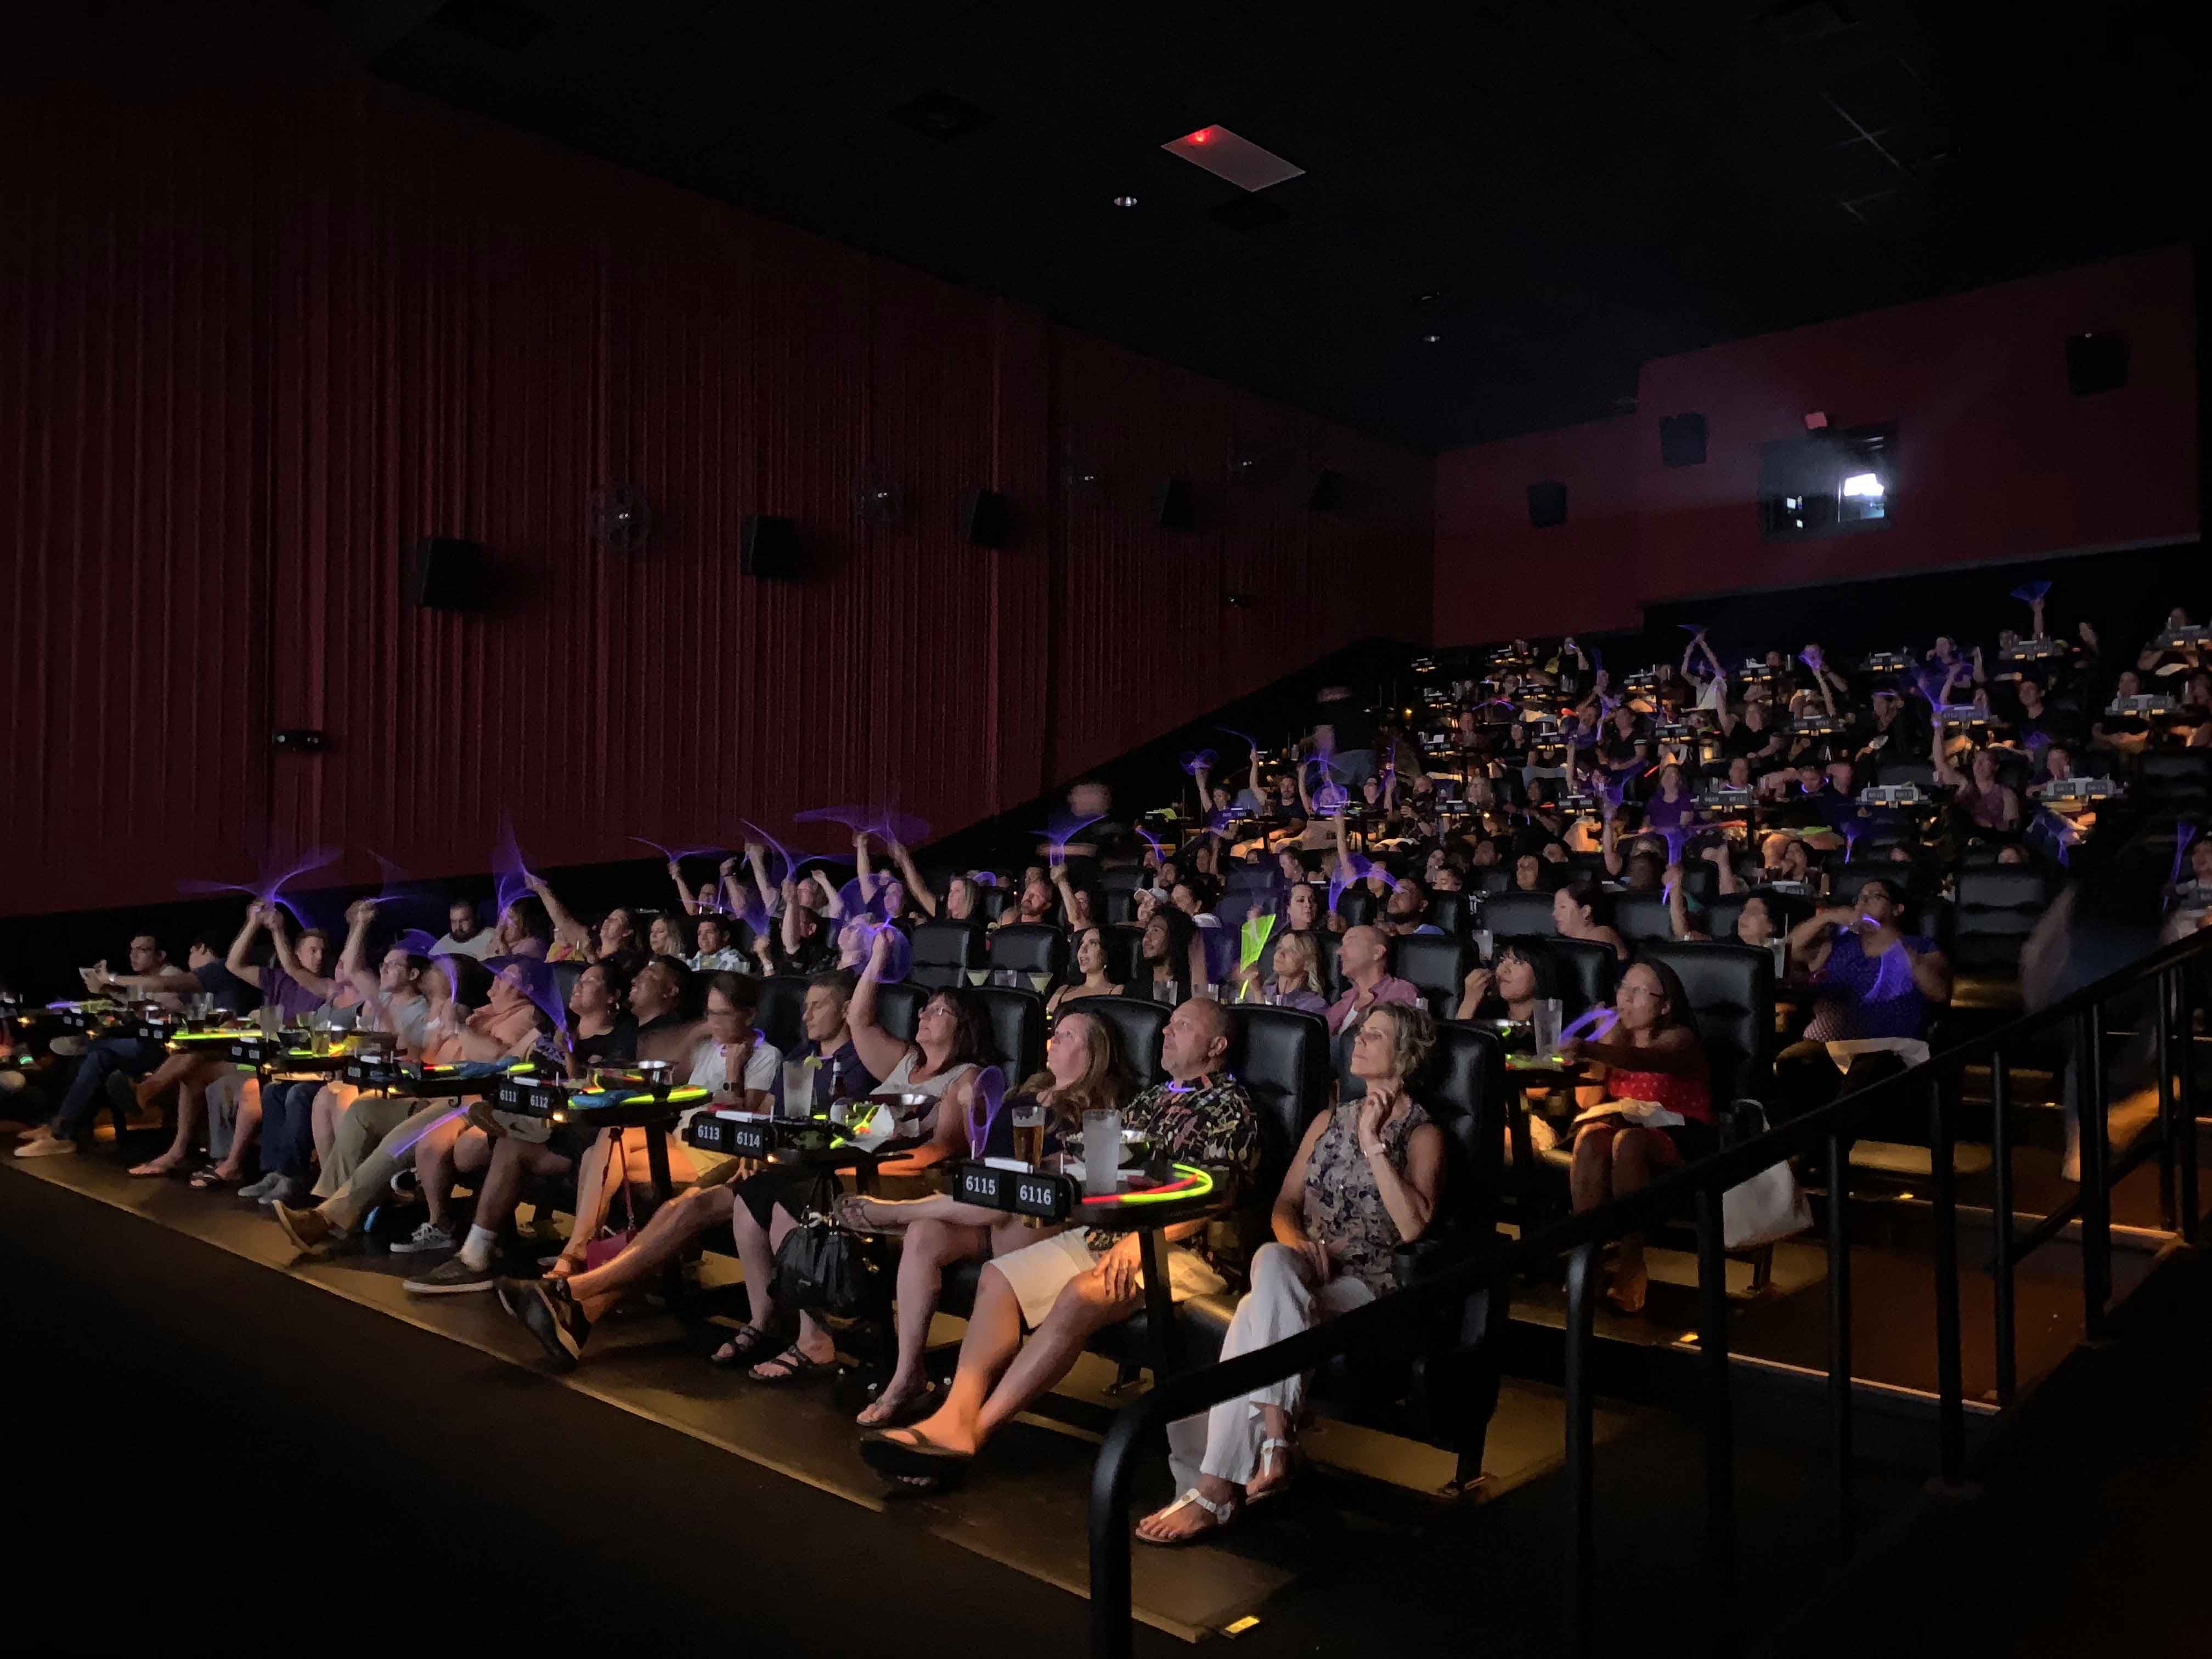 People at a movie theater event with glow sticks